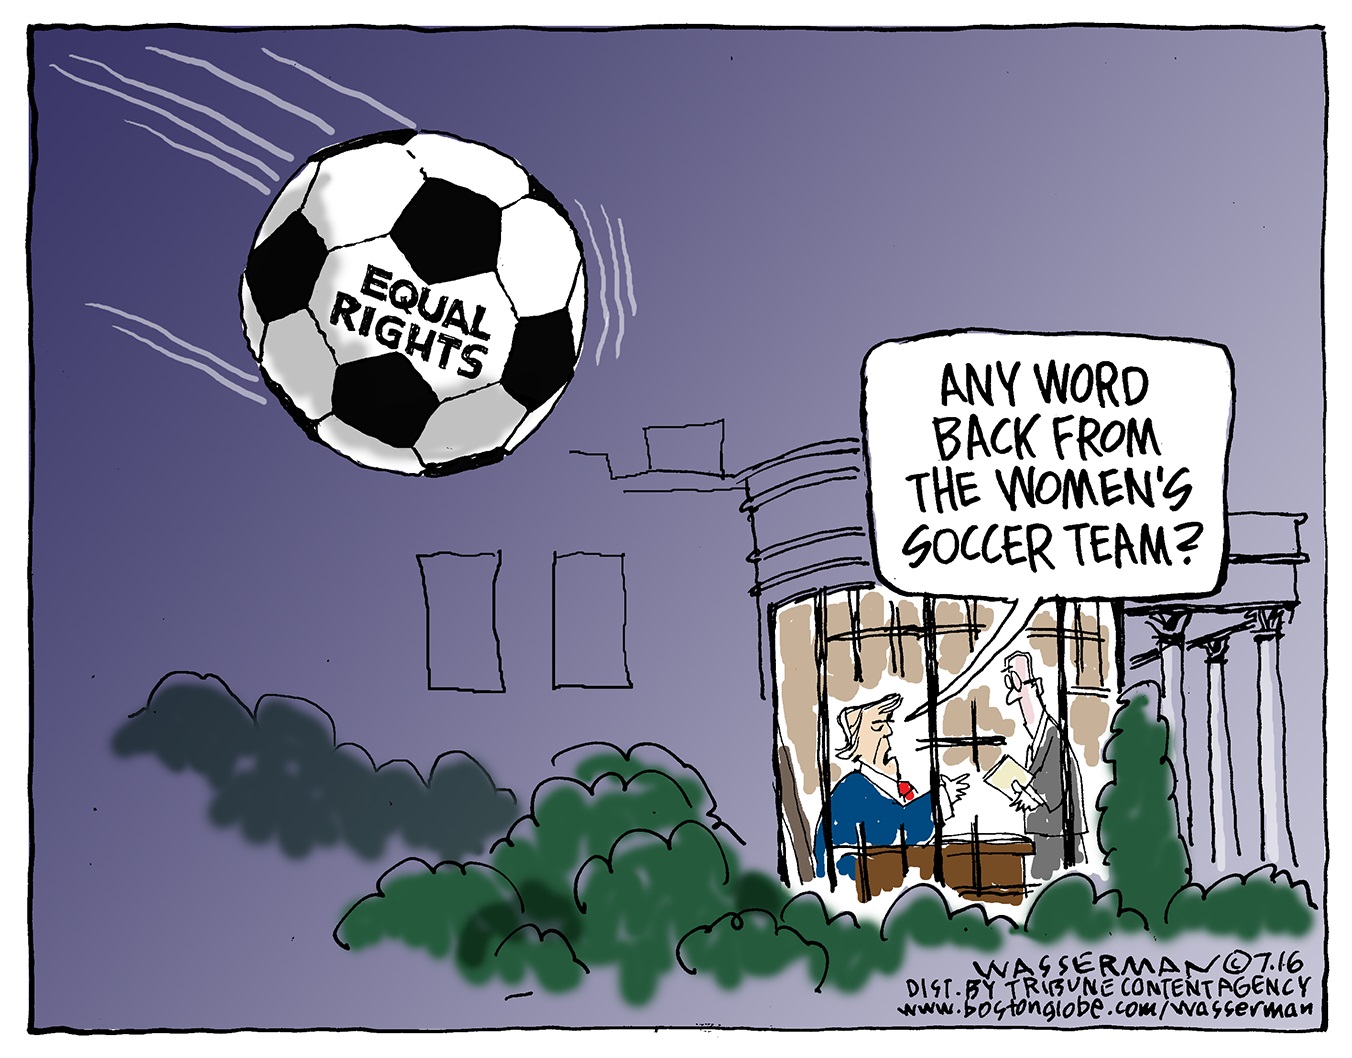 Editorial cartoons for July 14, 2019 Womens soccer, Jeffrey Epstein, divided Democrats hq nude photo